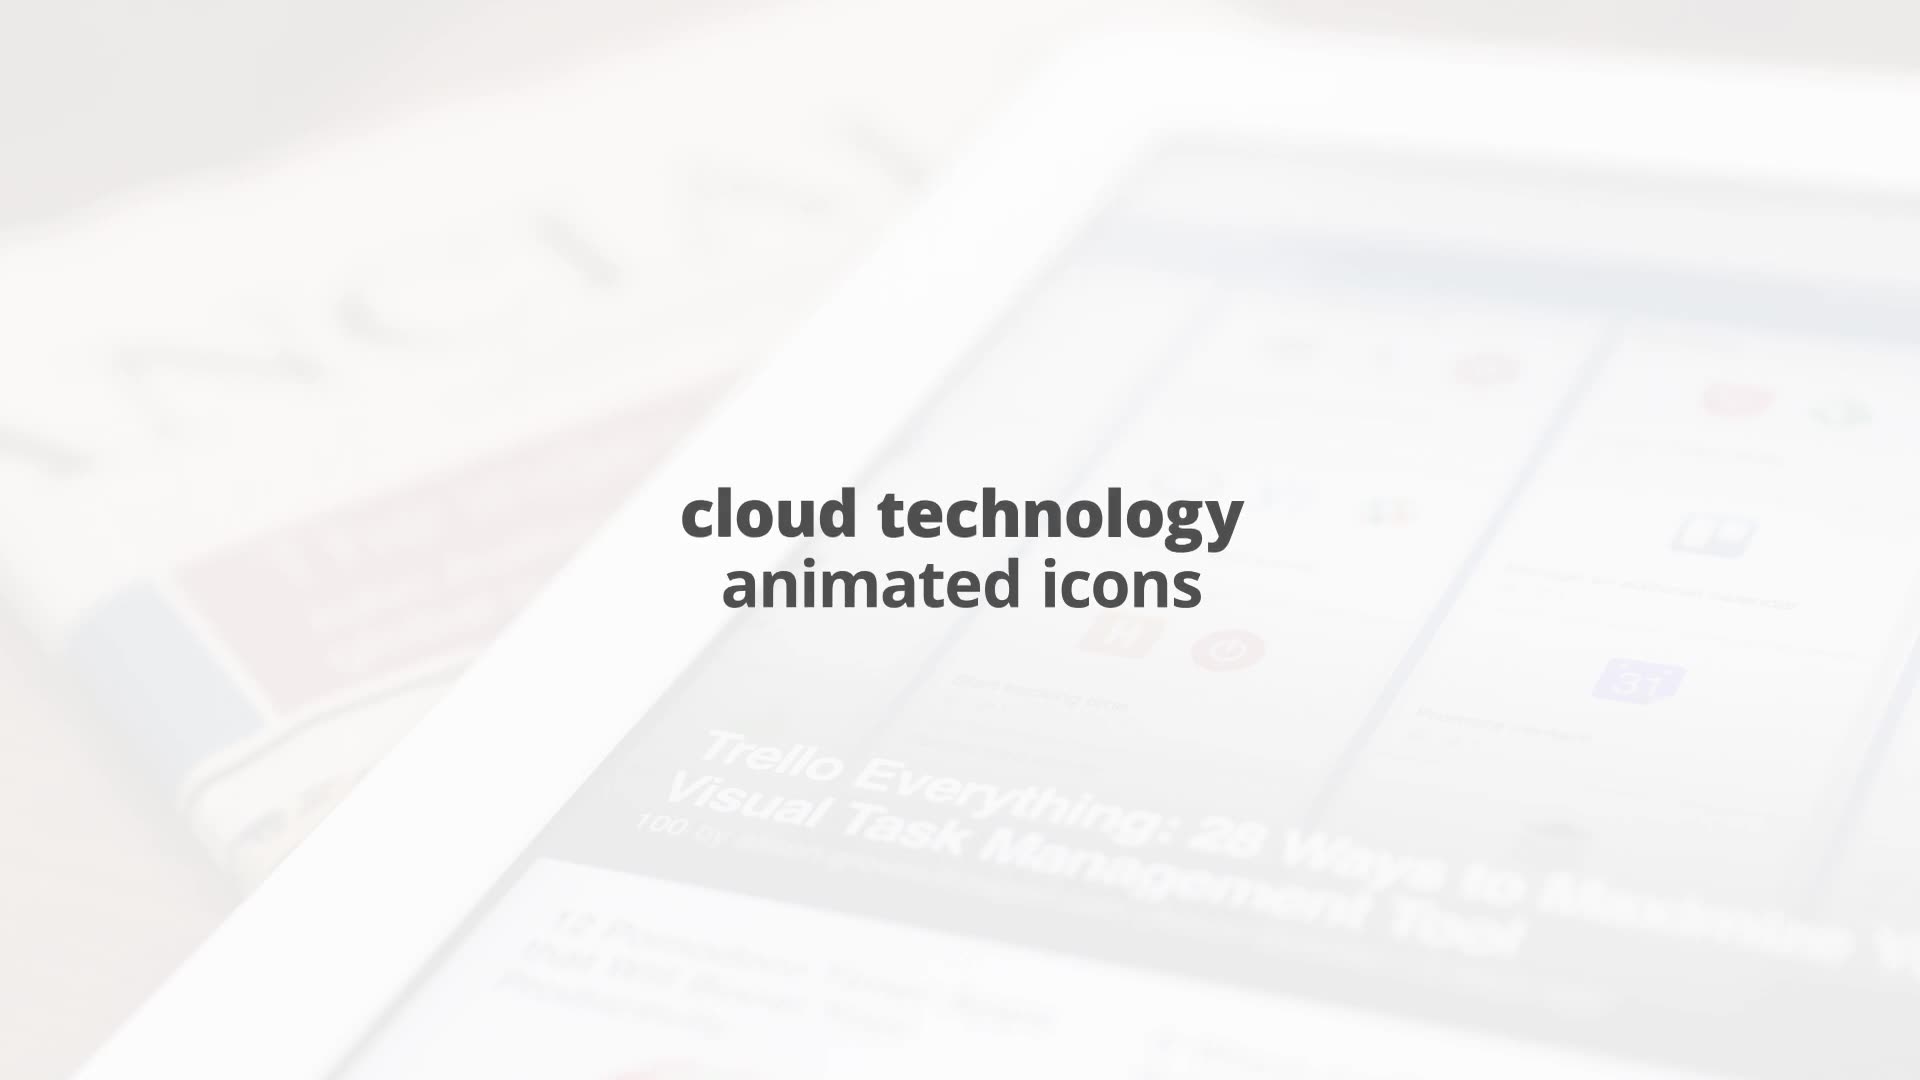 Cloud Technology – Thin Line Icons - Download Videohive 23455698